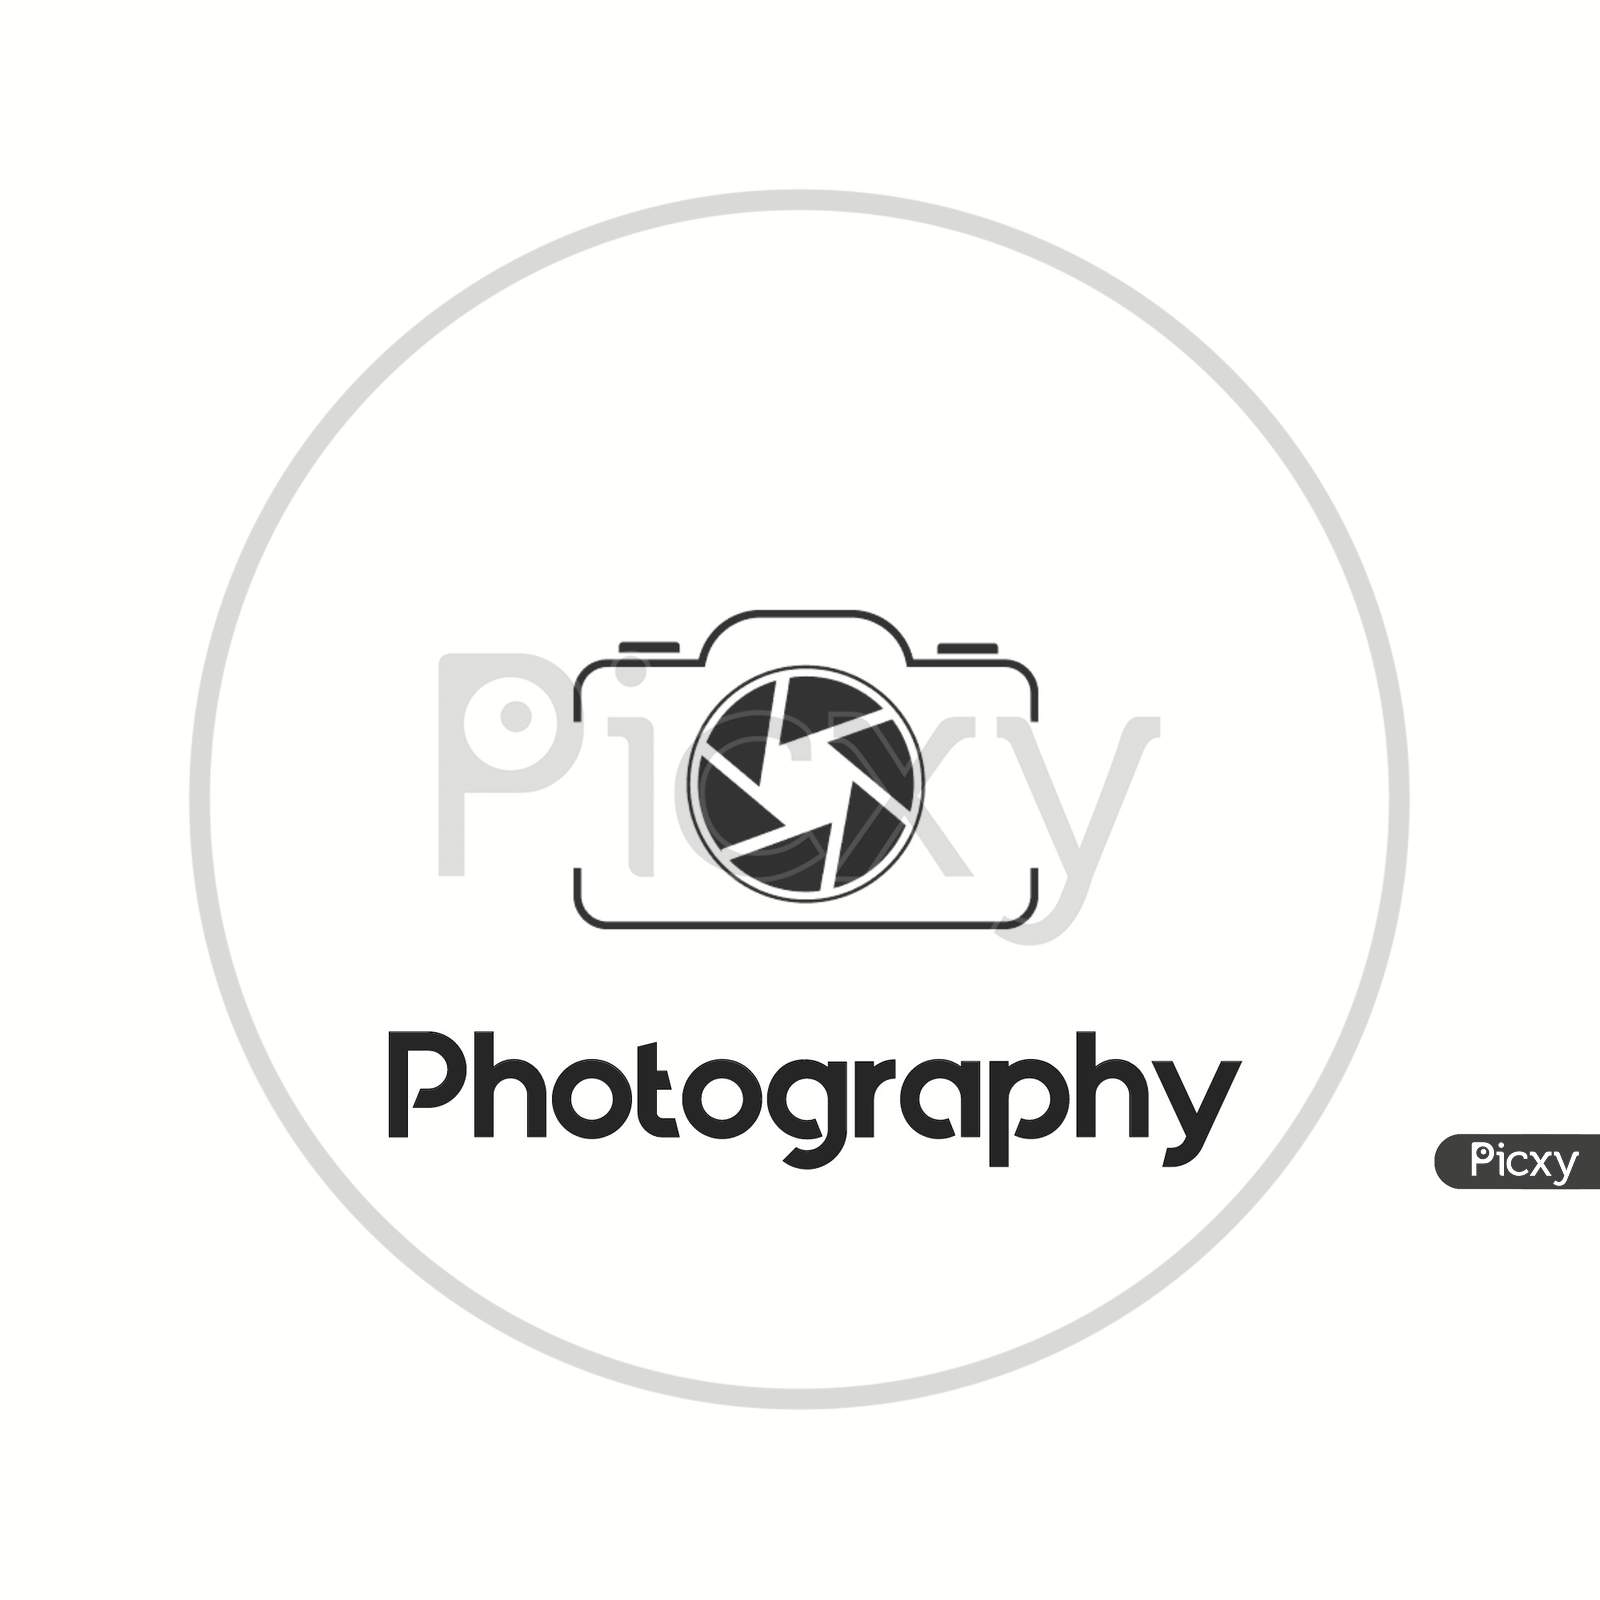 Photography icon new logo with white background 2020